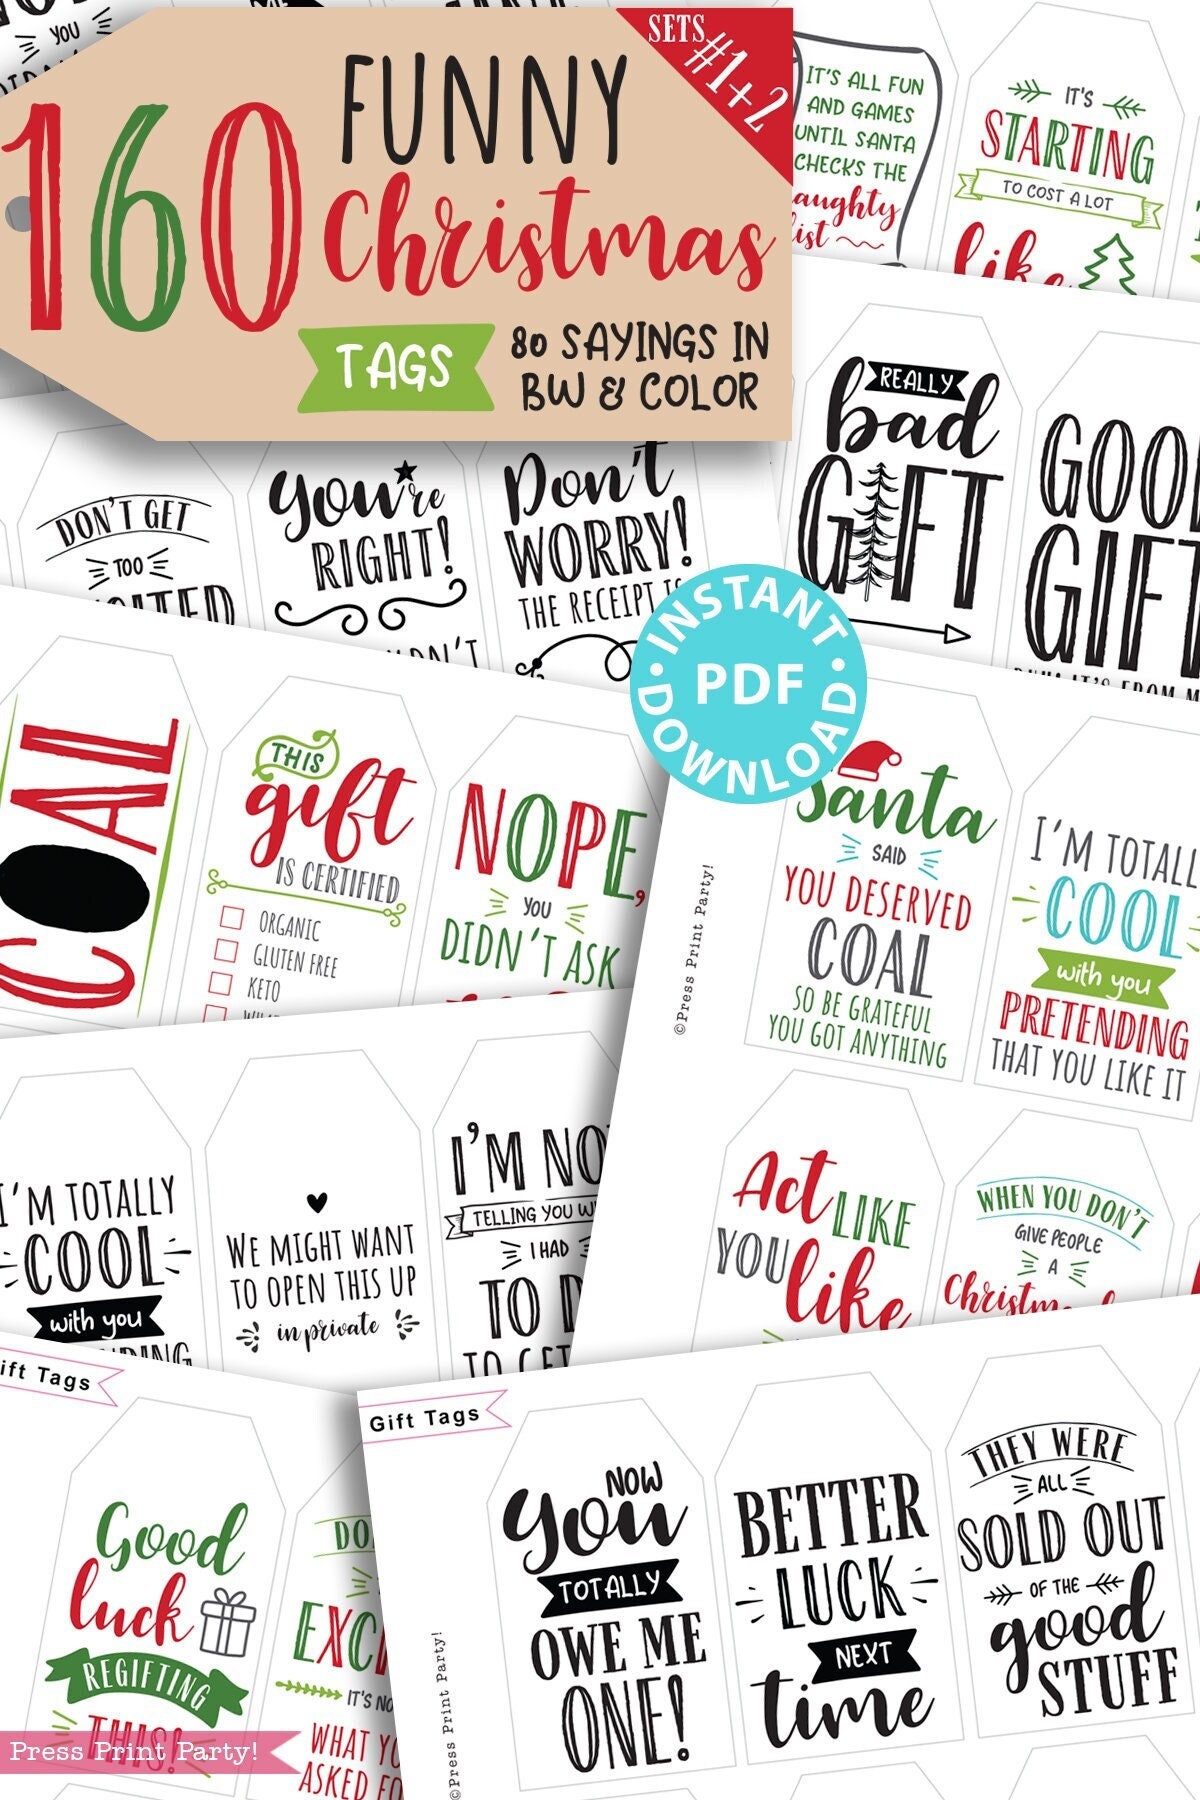 10 Awesome White Elephant Gift Ideas Under $30, The Sassy Southern